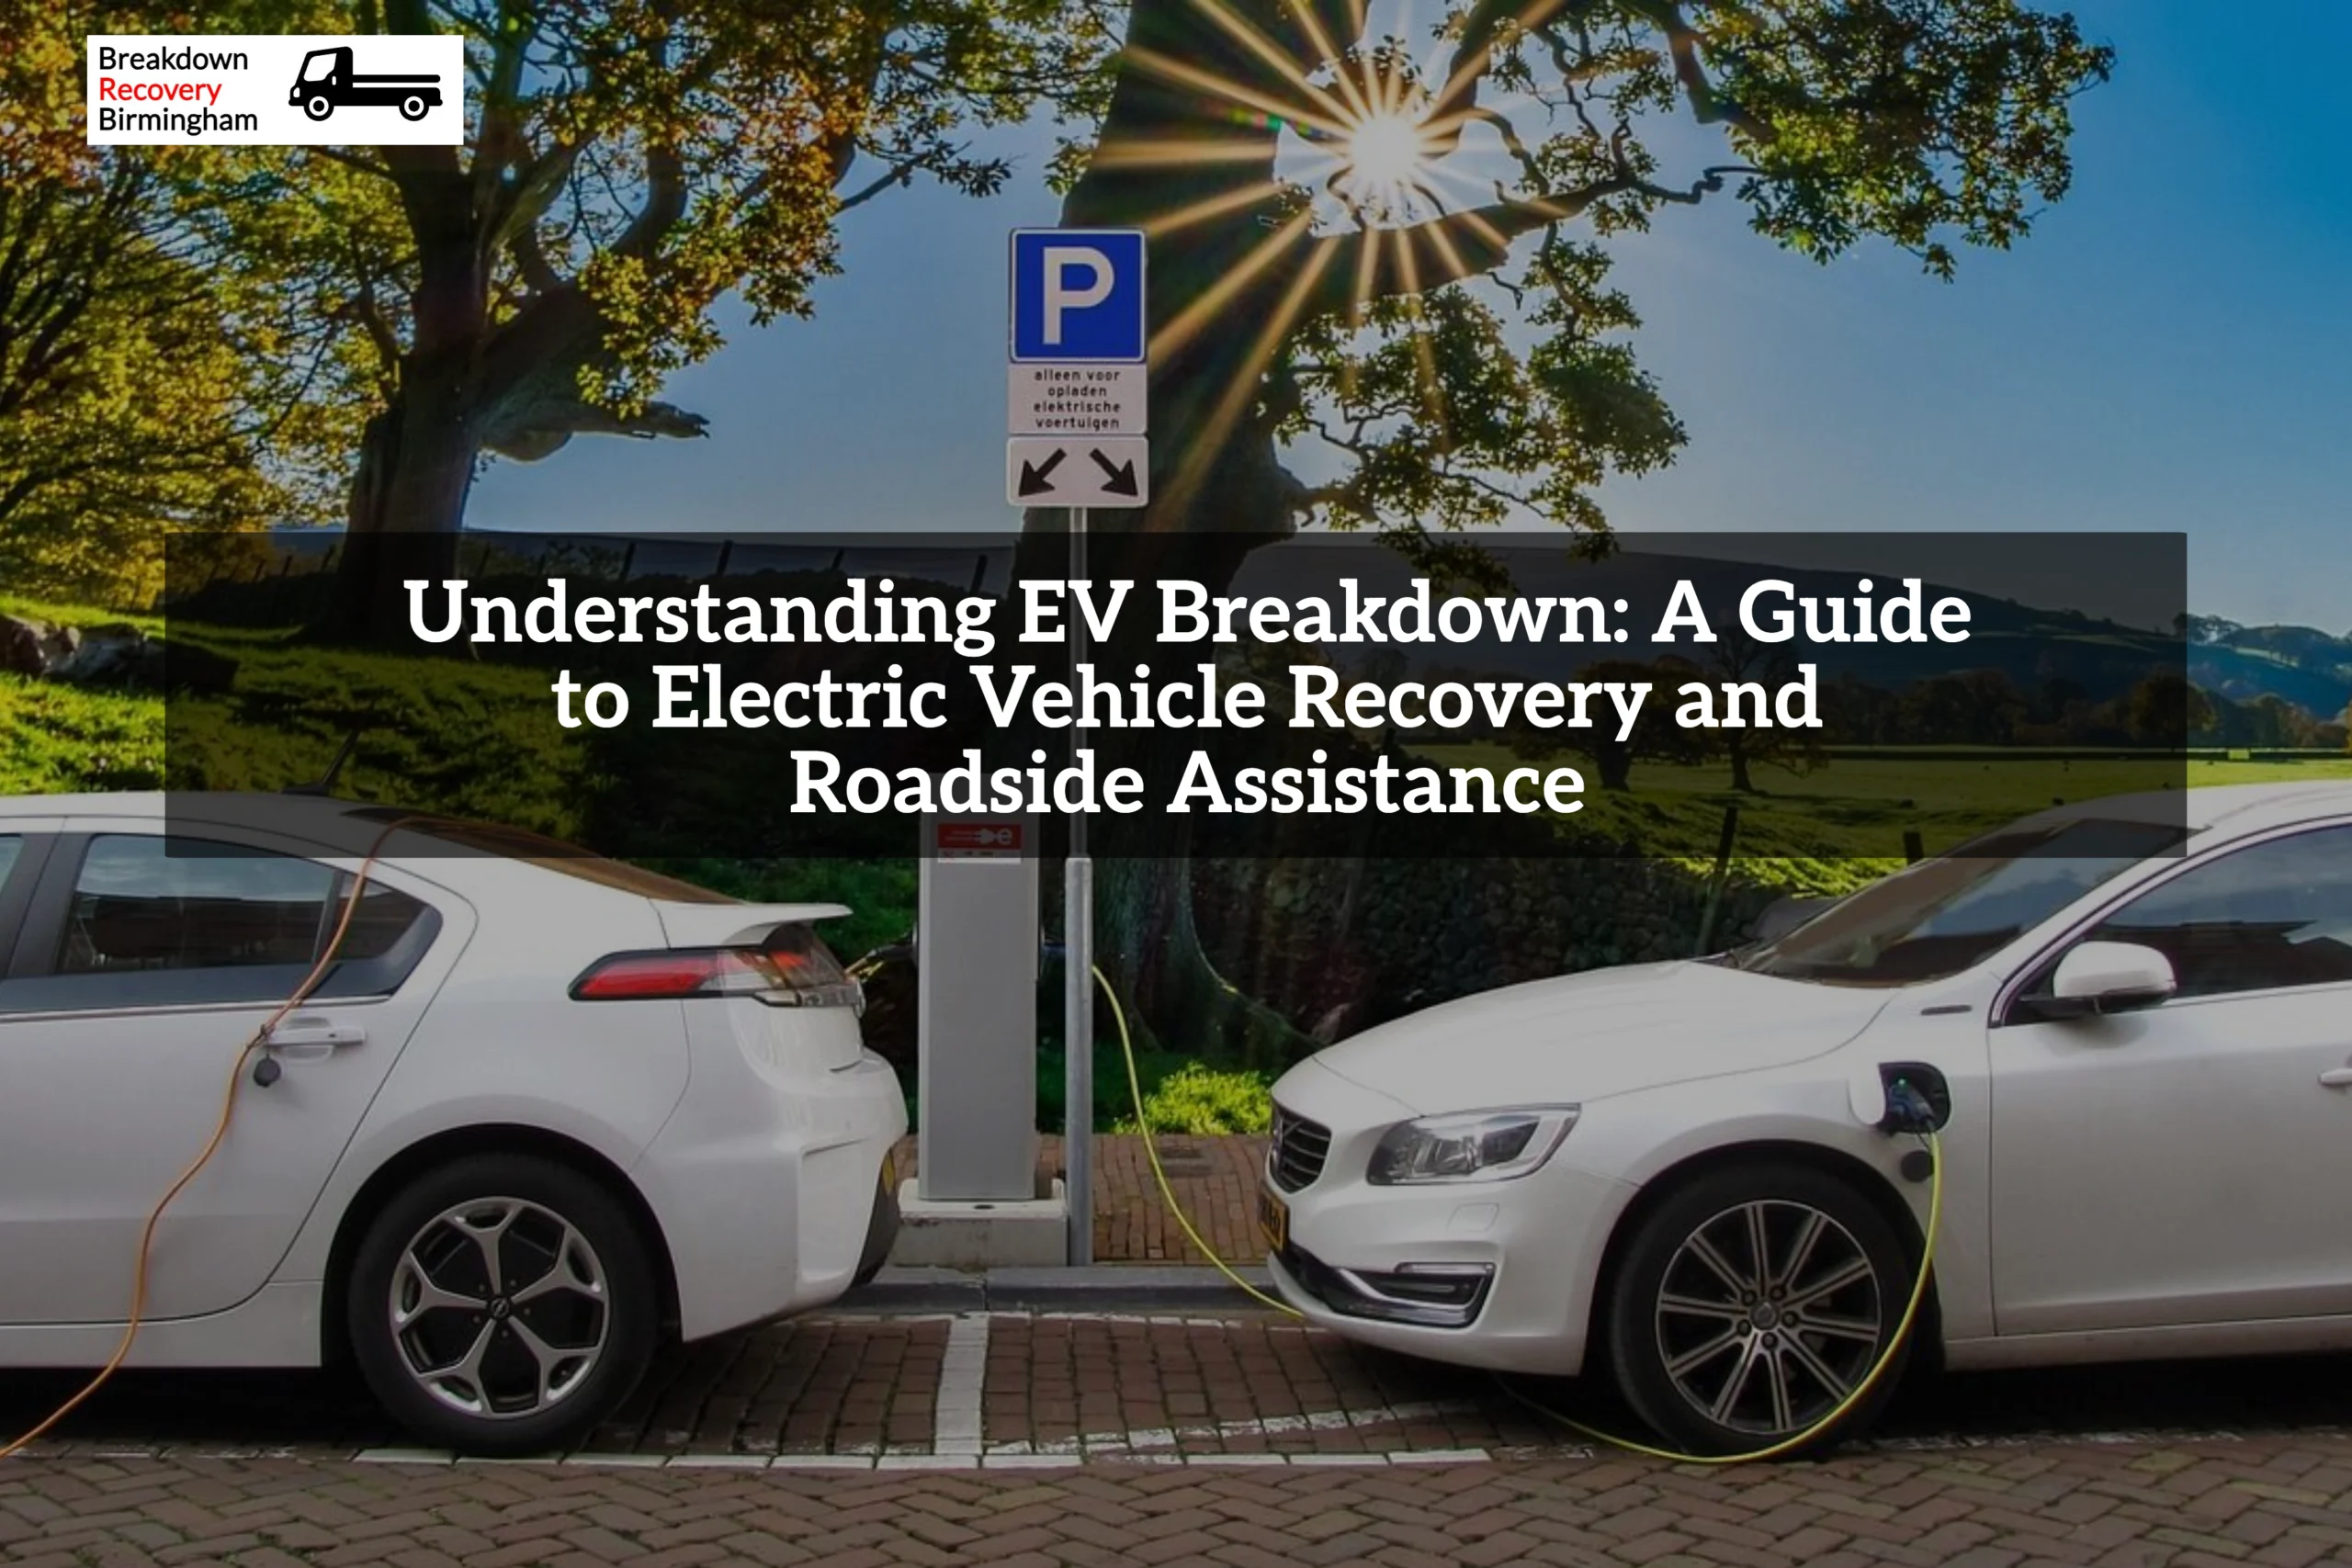 Understanding EV Breakdown: A Guide to Electric Vehicle Recovery and Roadside Assistance